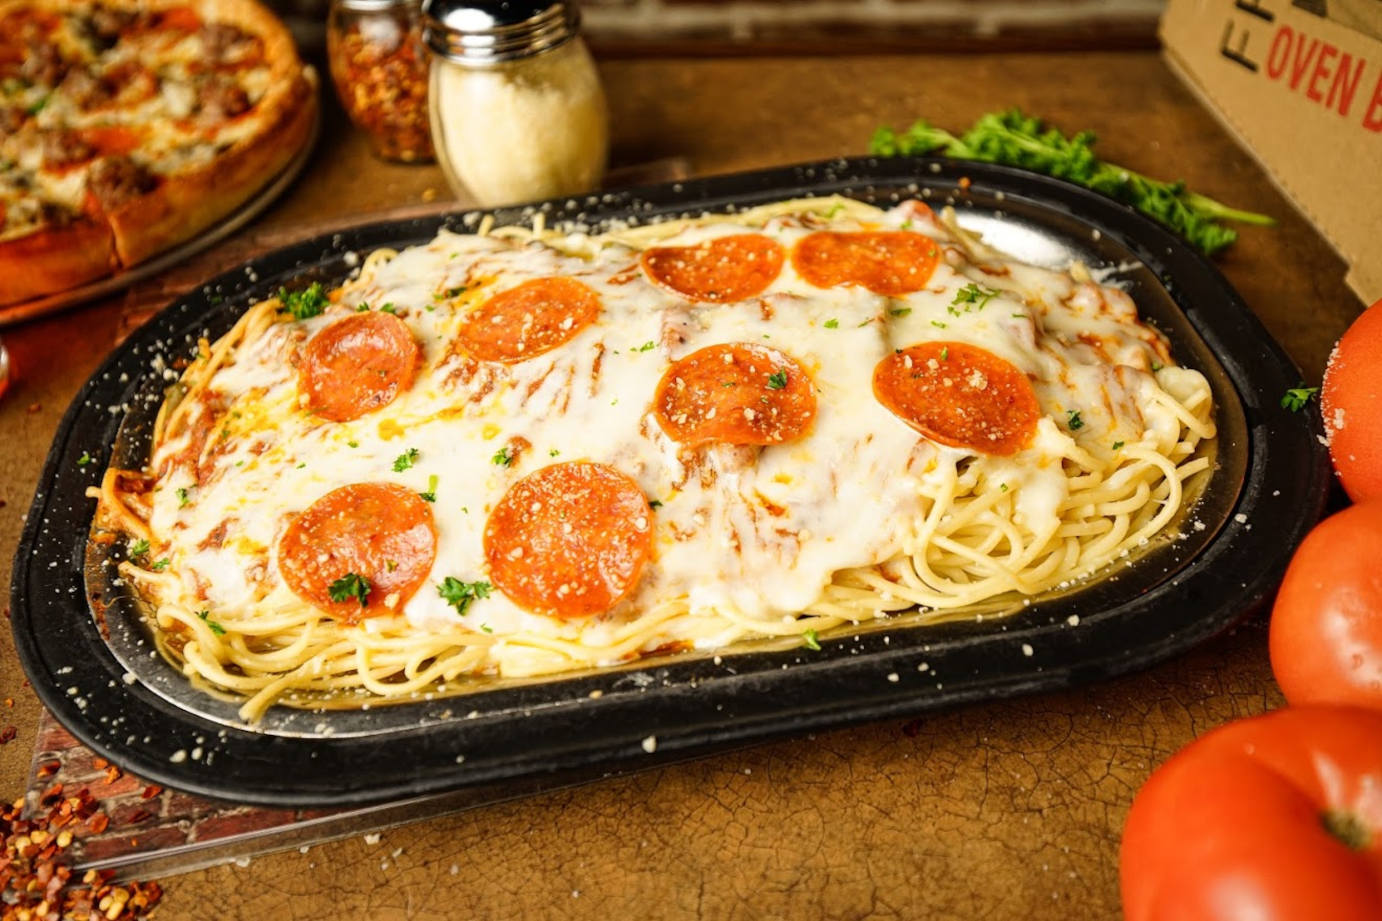 Spaghetti with cheese and sausage